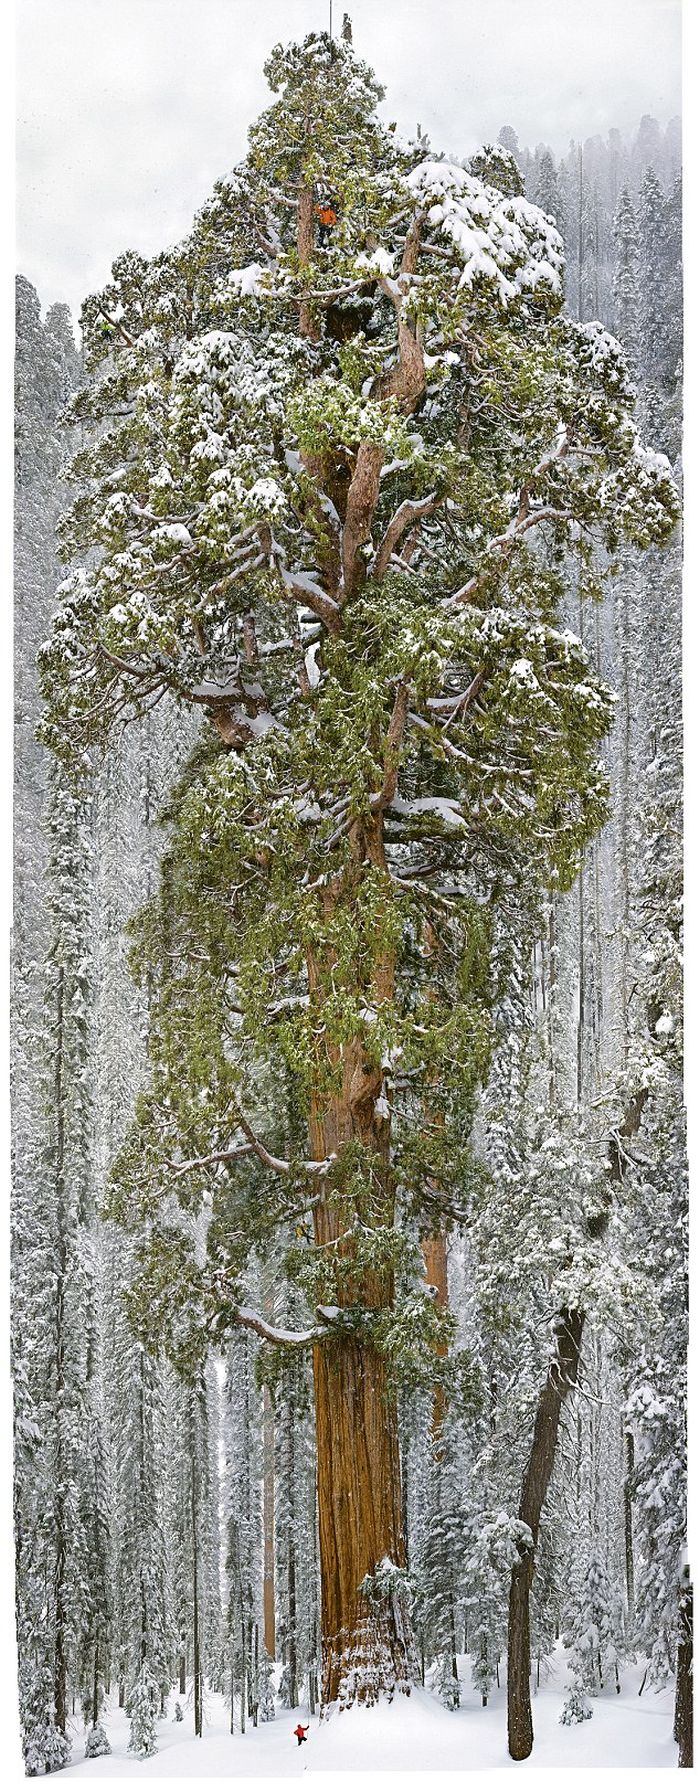 How to Make a Photo of a Giant Tree